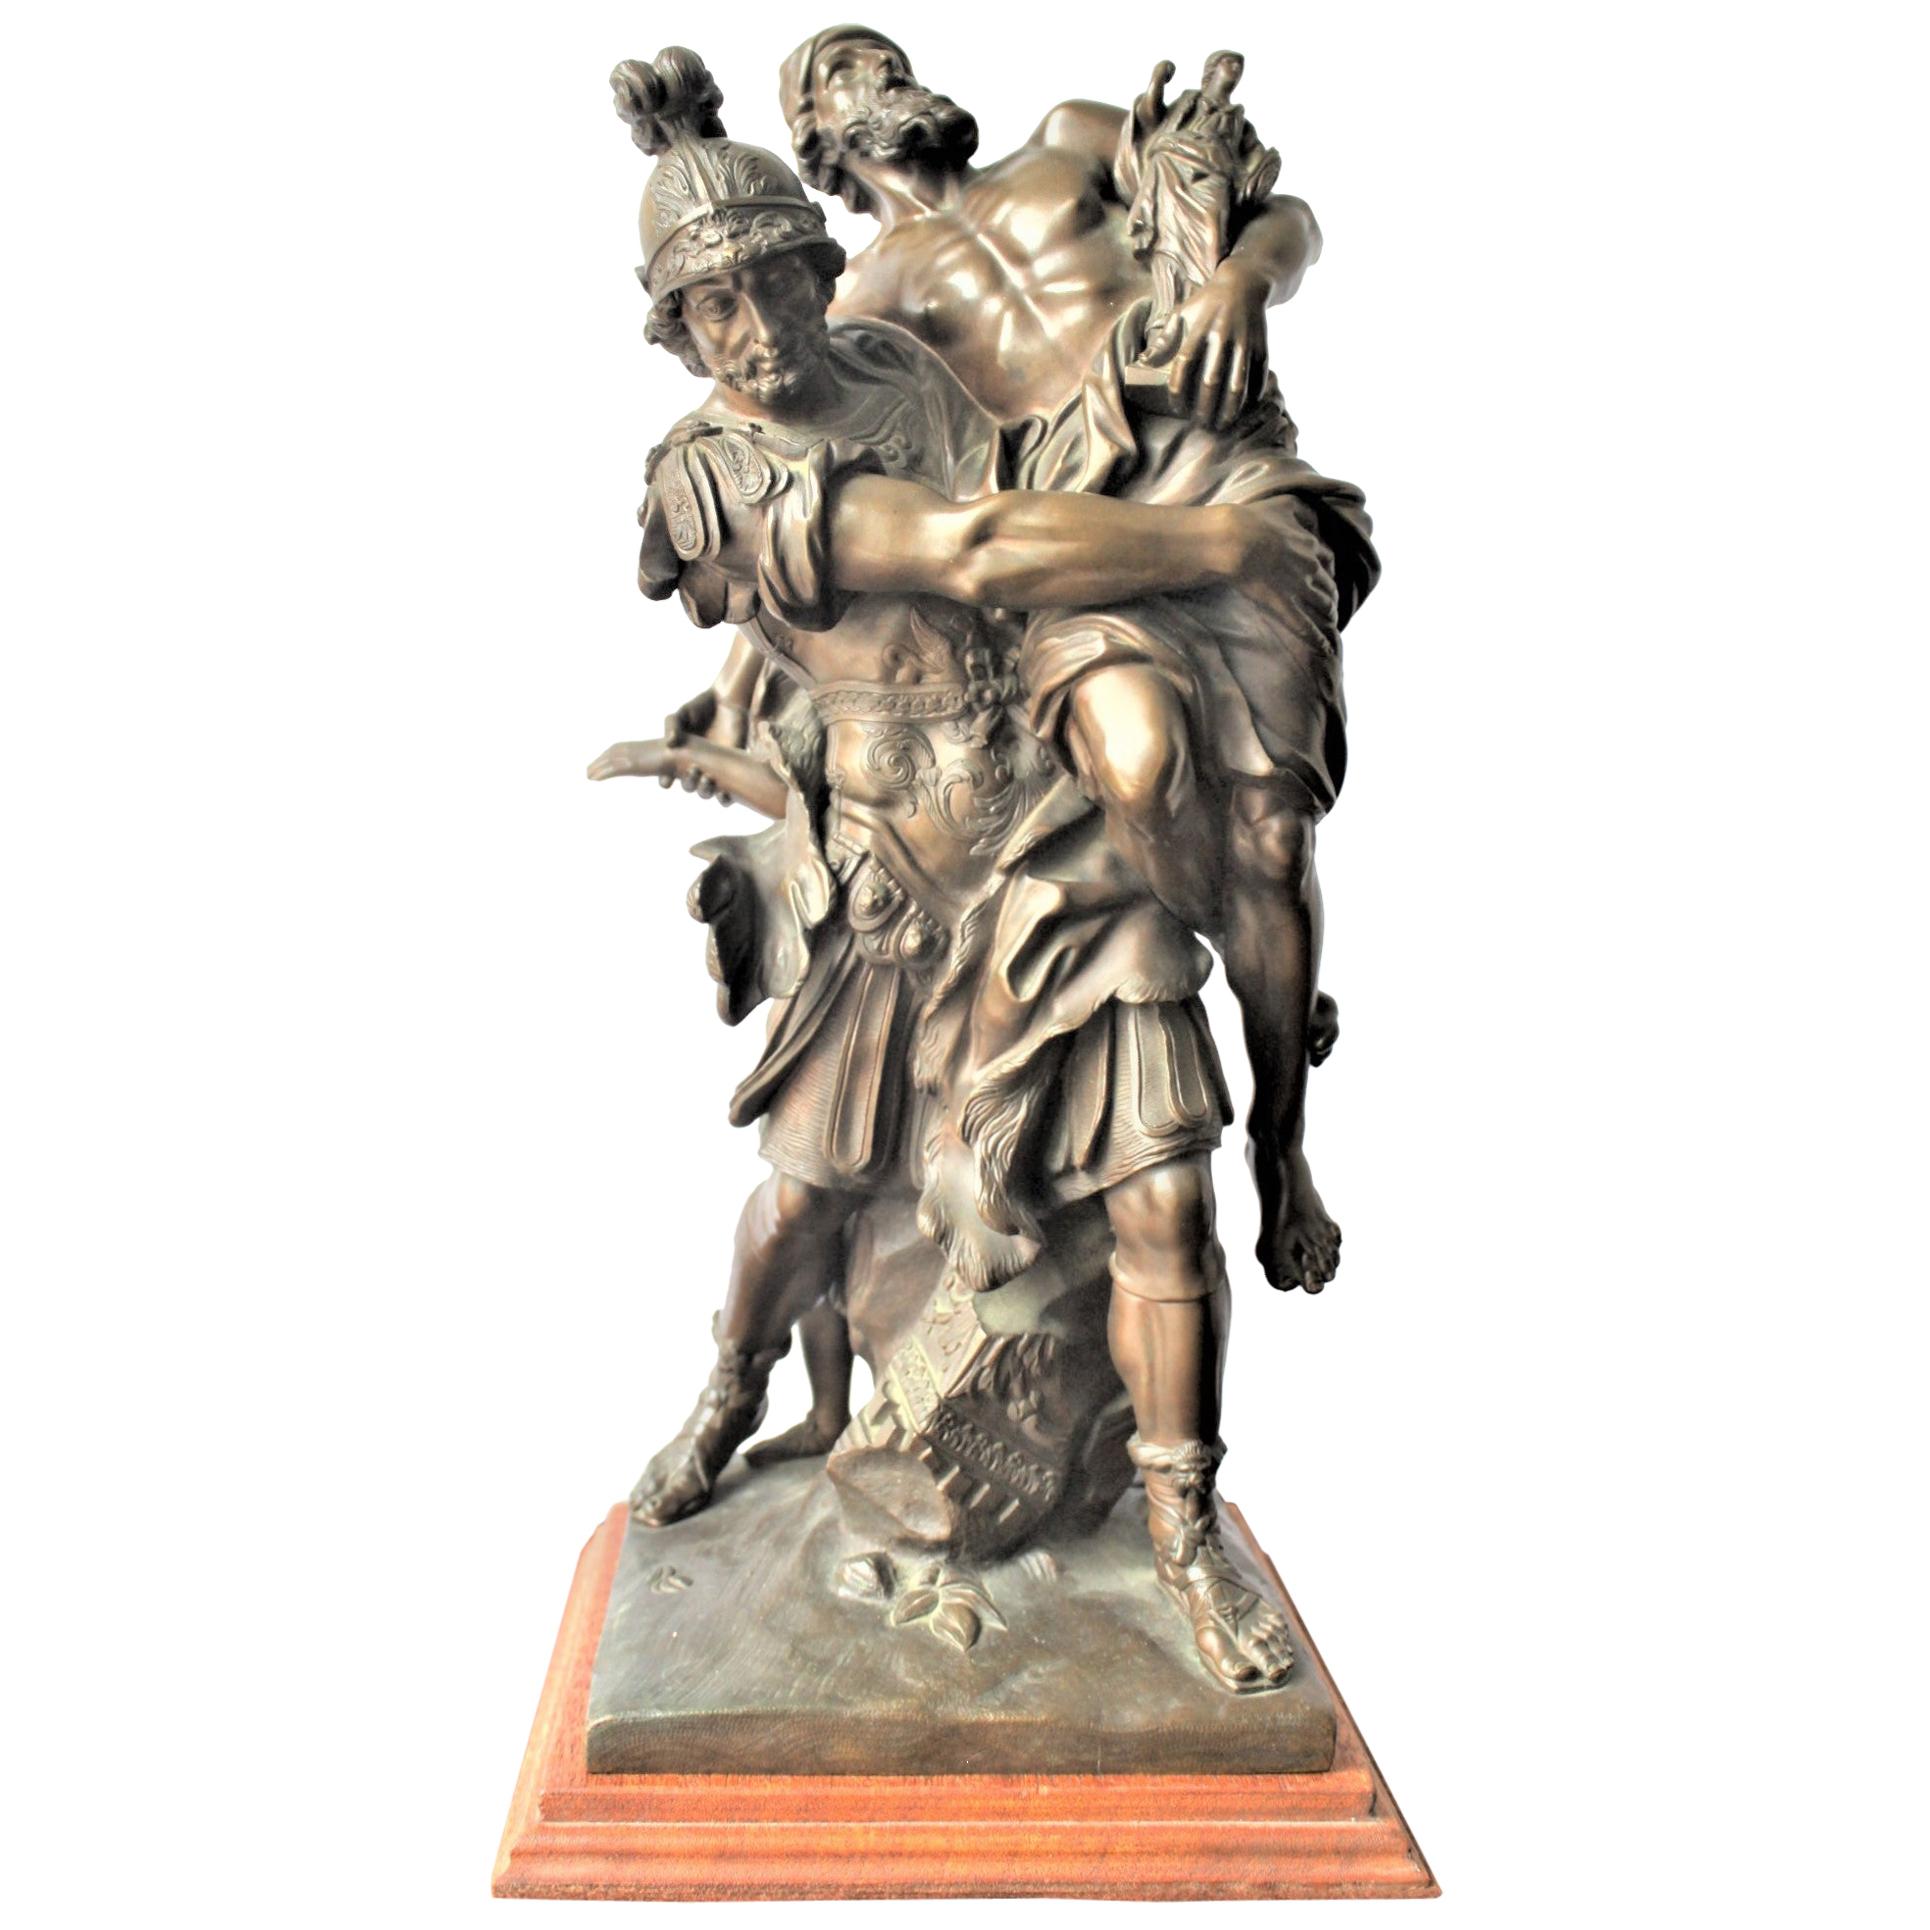 Antique French Bronze Neoclassical Revival Styled Greek Mythological Sculpture For Sale